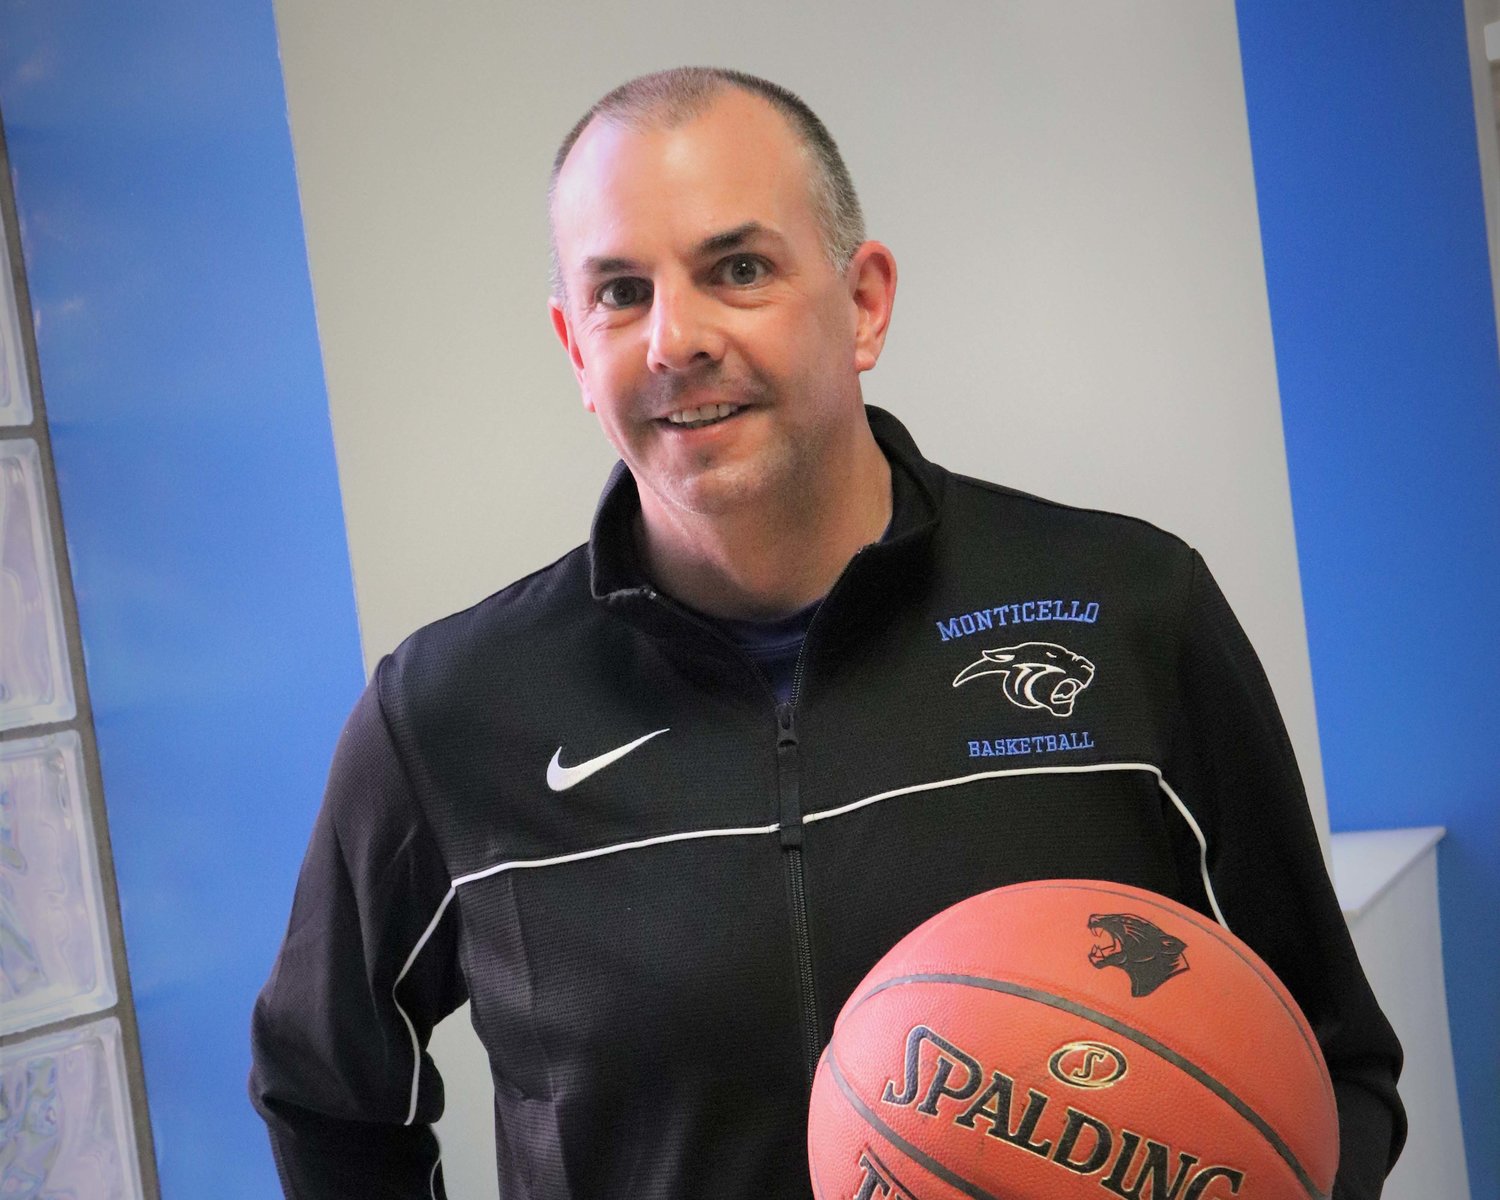 Christopher Russo has been named 2020-21 Basketball Coach of the Year for New York State.